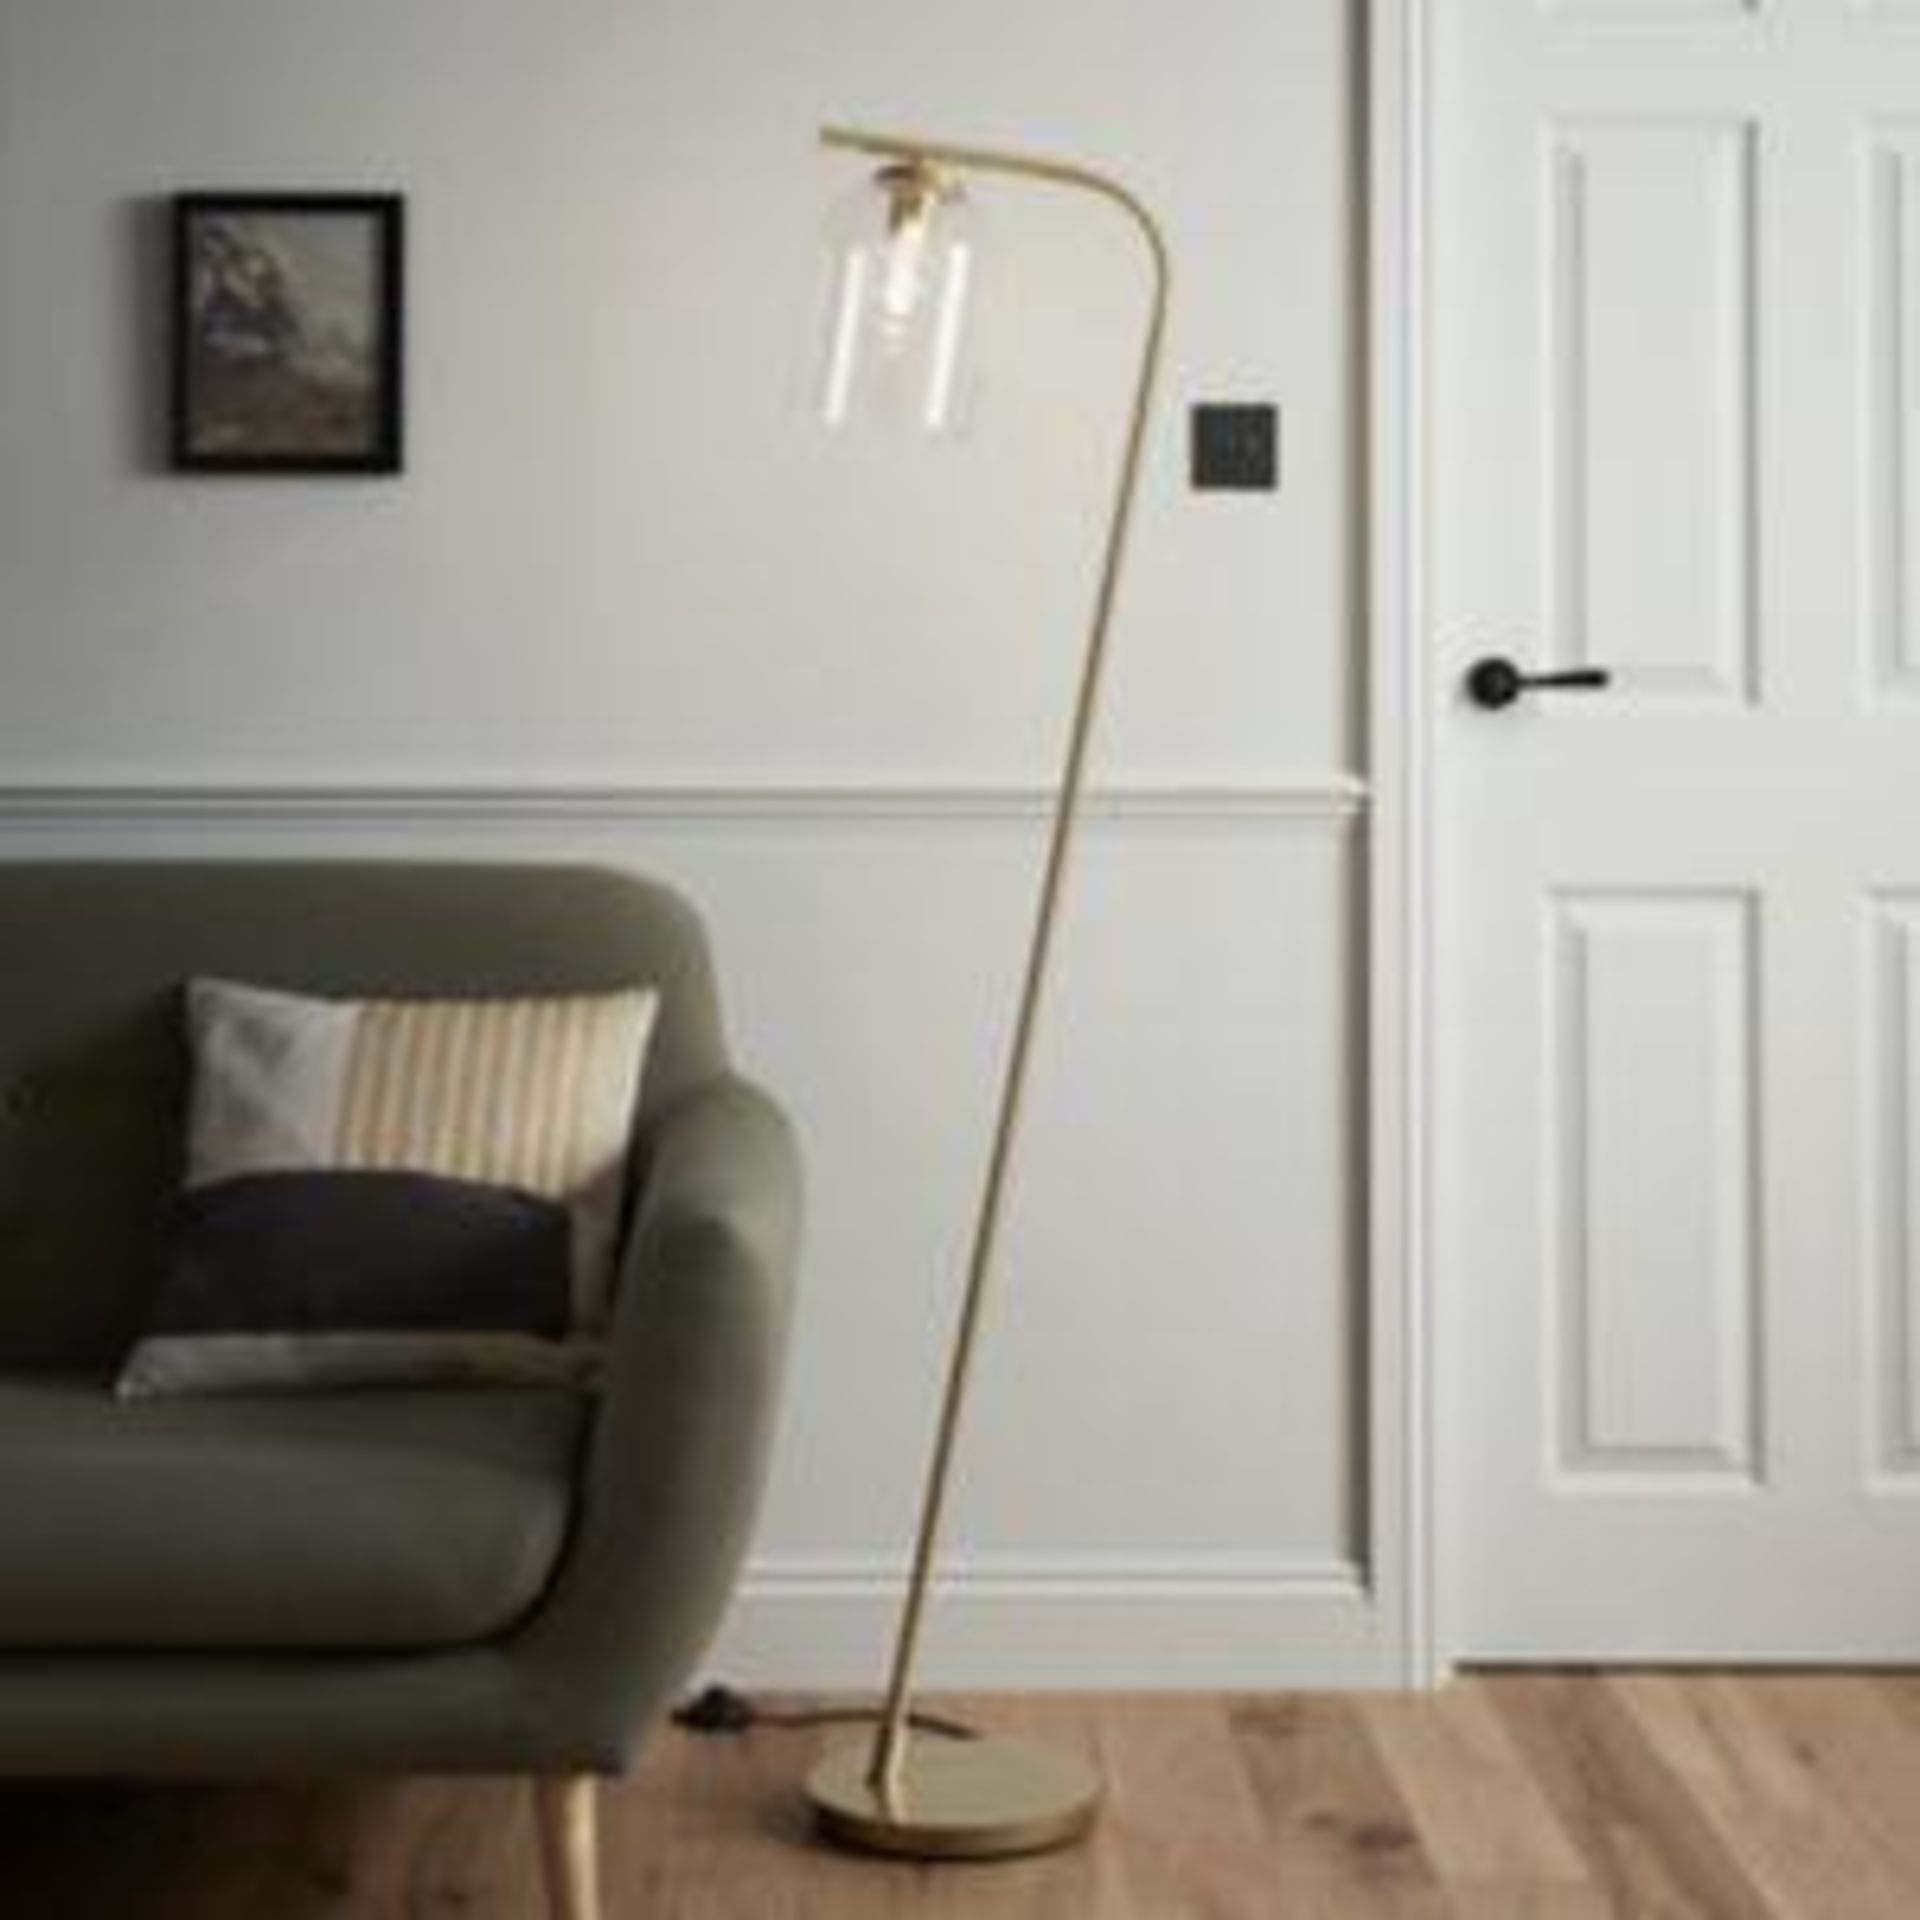 GoodHome Thestias Brass Effect Floor Light - SR23. This brushed brass effect floor lamp has a